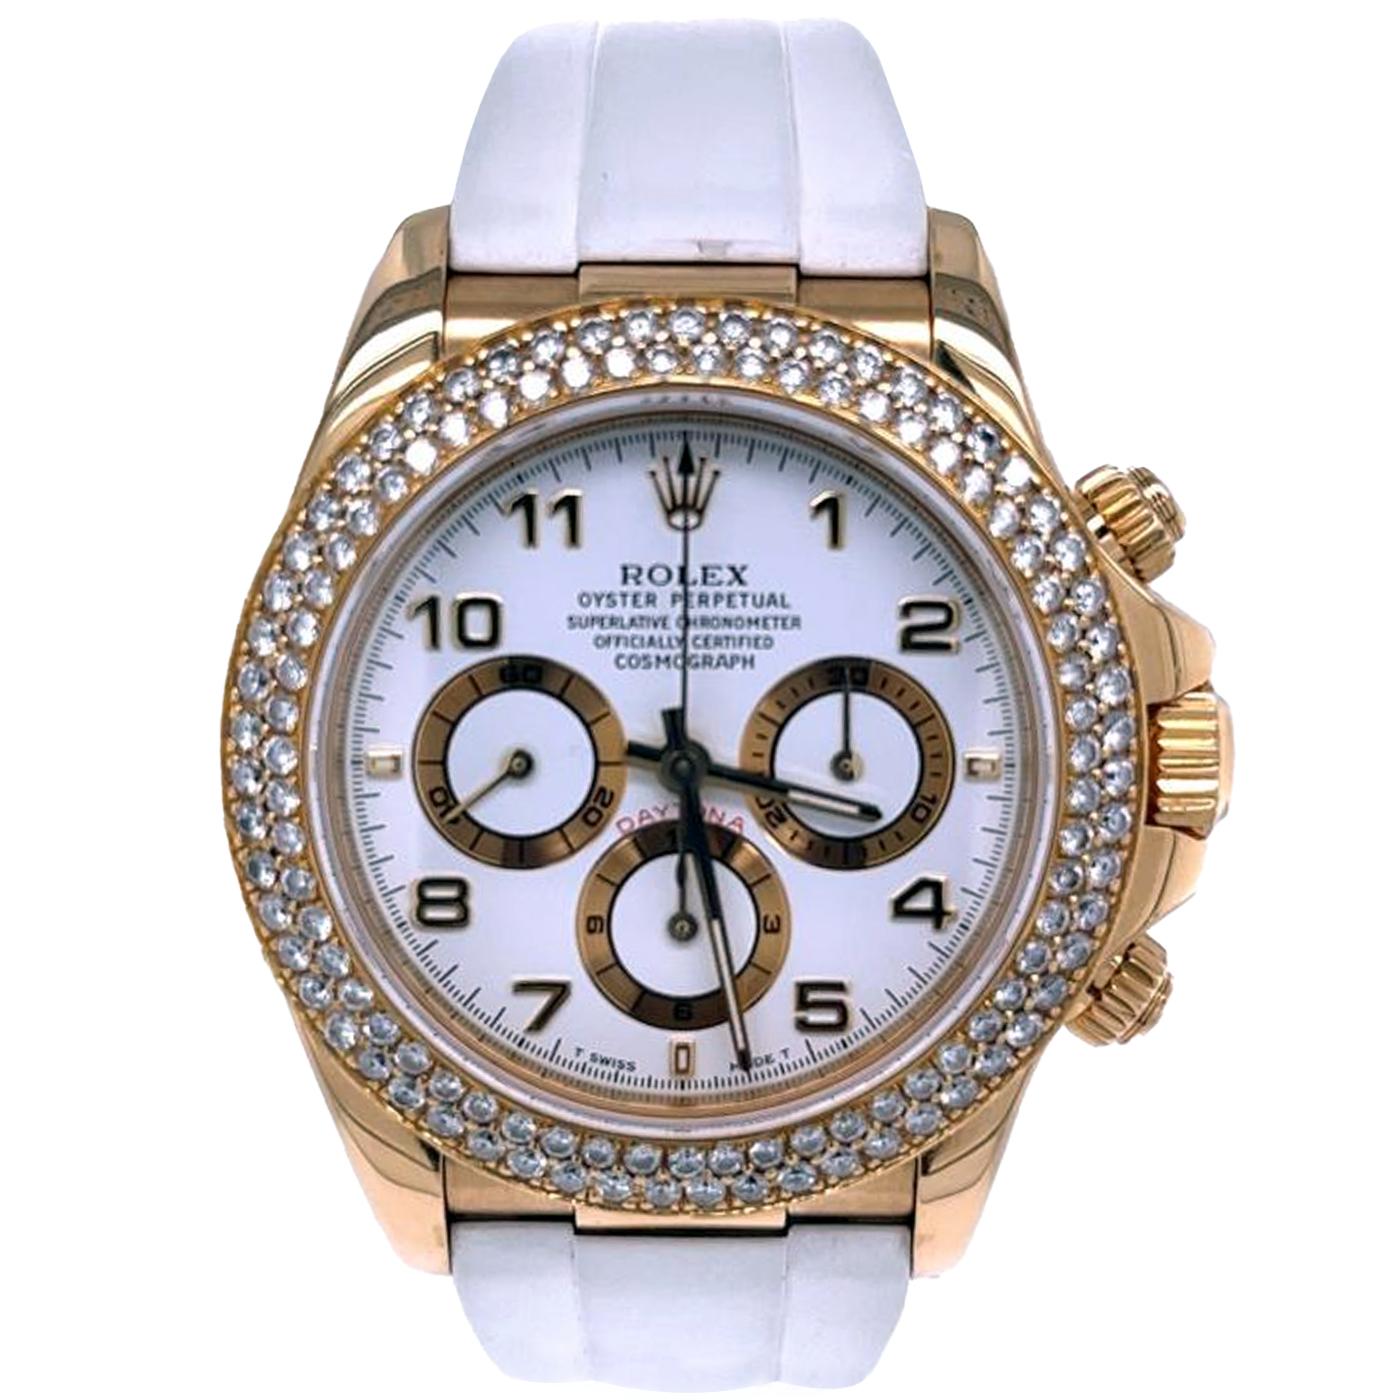 Rolex Cosmograph Daytona Chronograph 116518 dated 1996 in 18k yellow gold features an original white dial with gold Arabic hour markers. Engraved inner bezel with serial number. Comes on a White strap with Rolex 18k yellow gold deployant buckle.